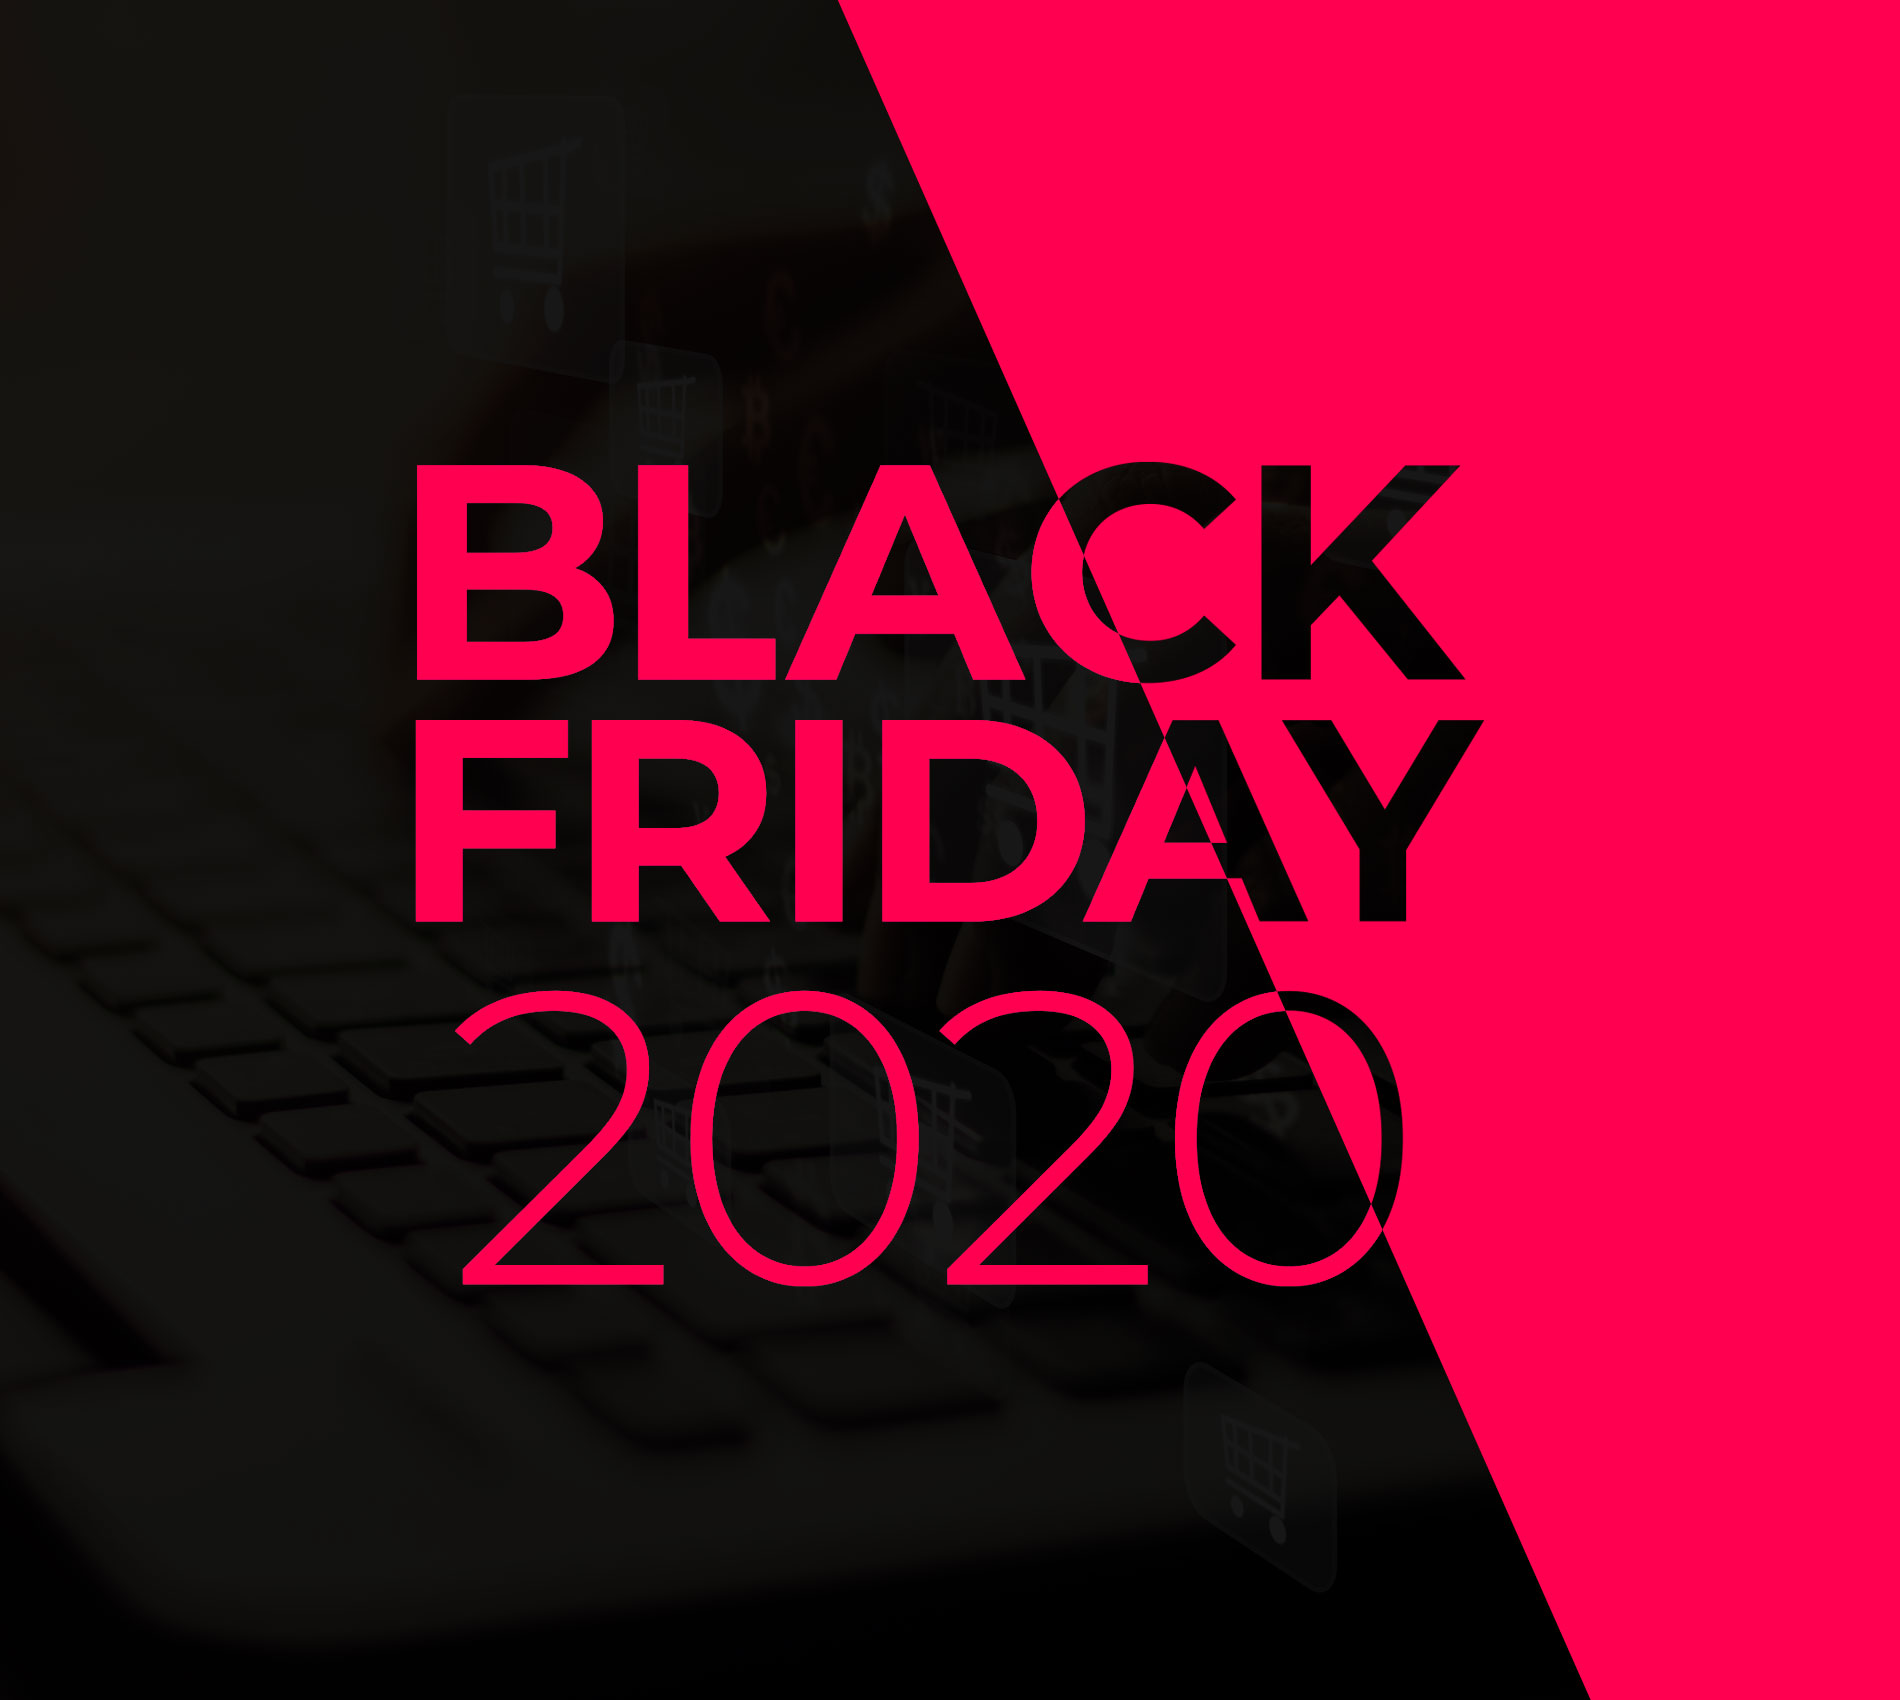 Black Friday 2020 in Brazil: the most digital edition in history